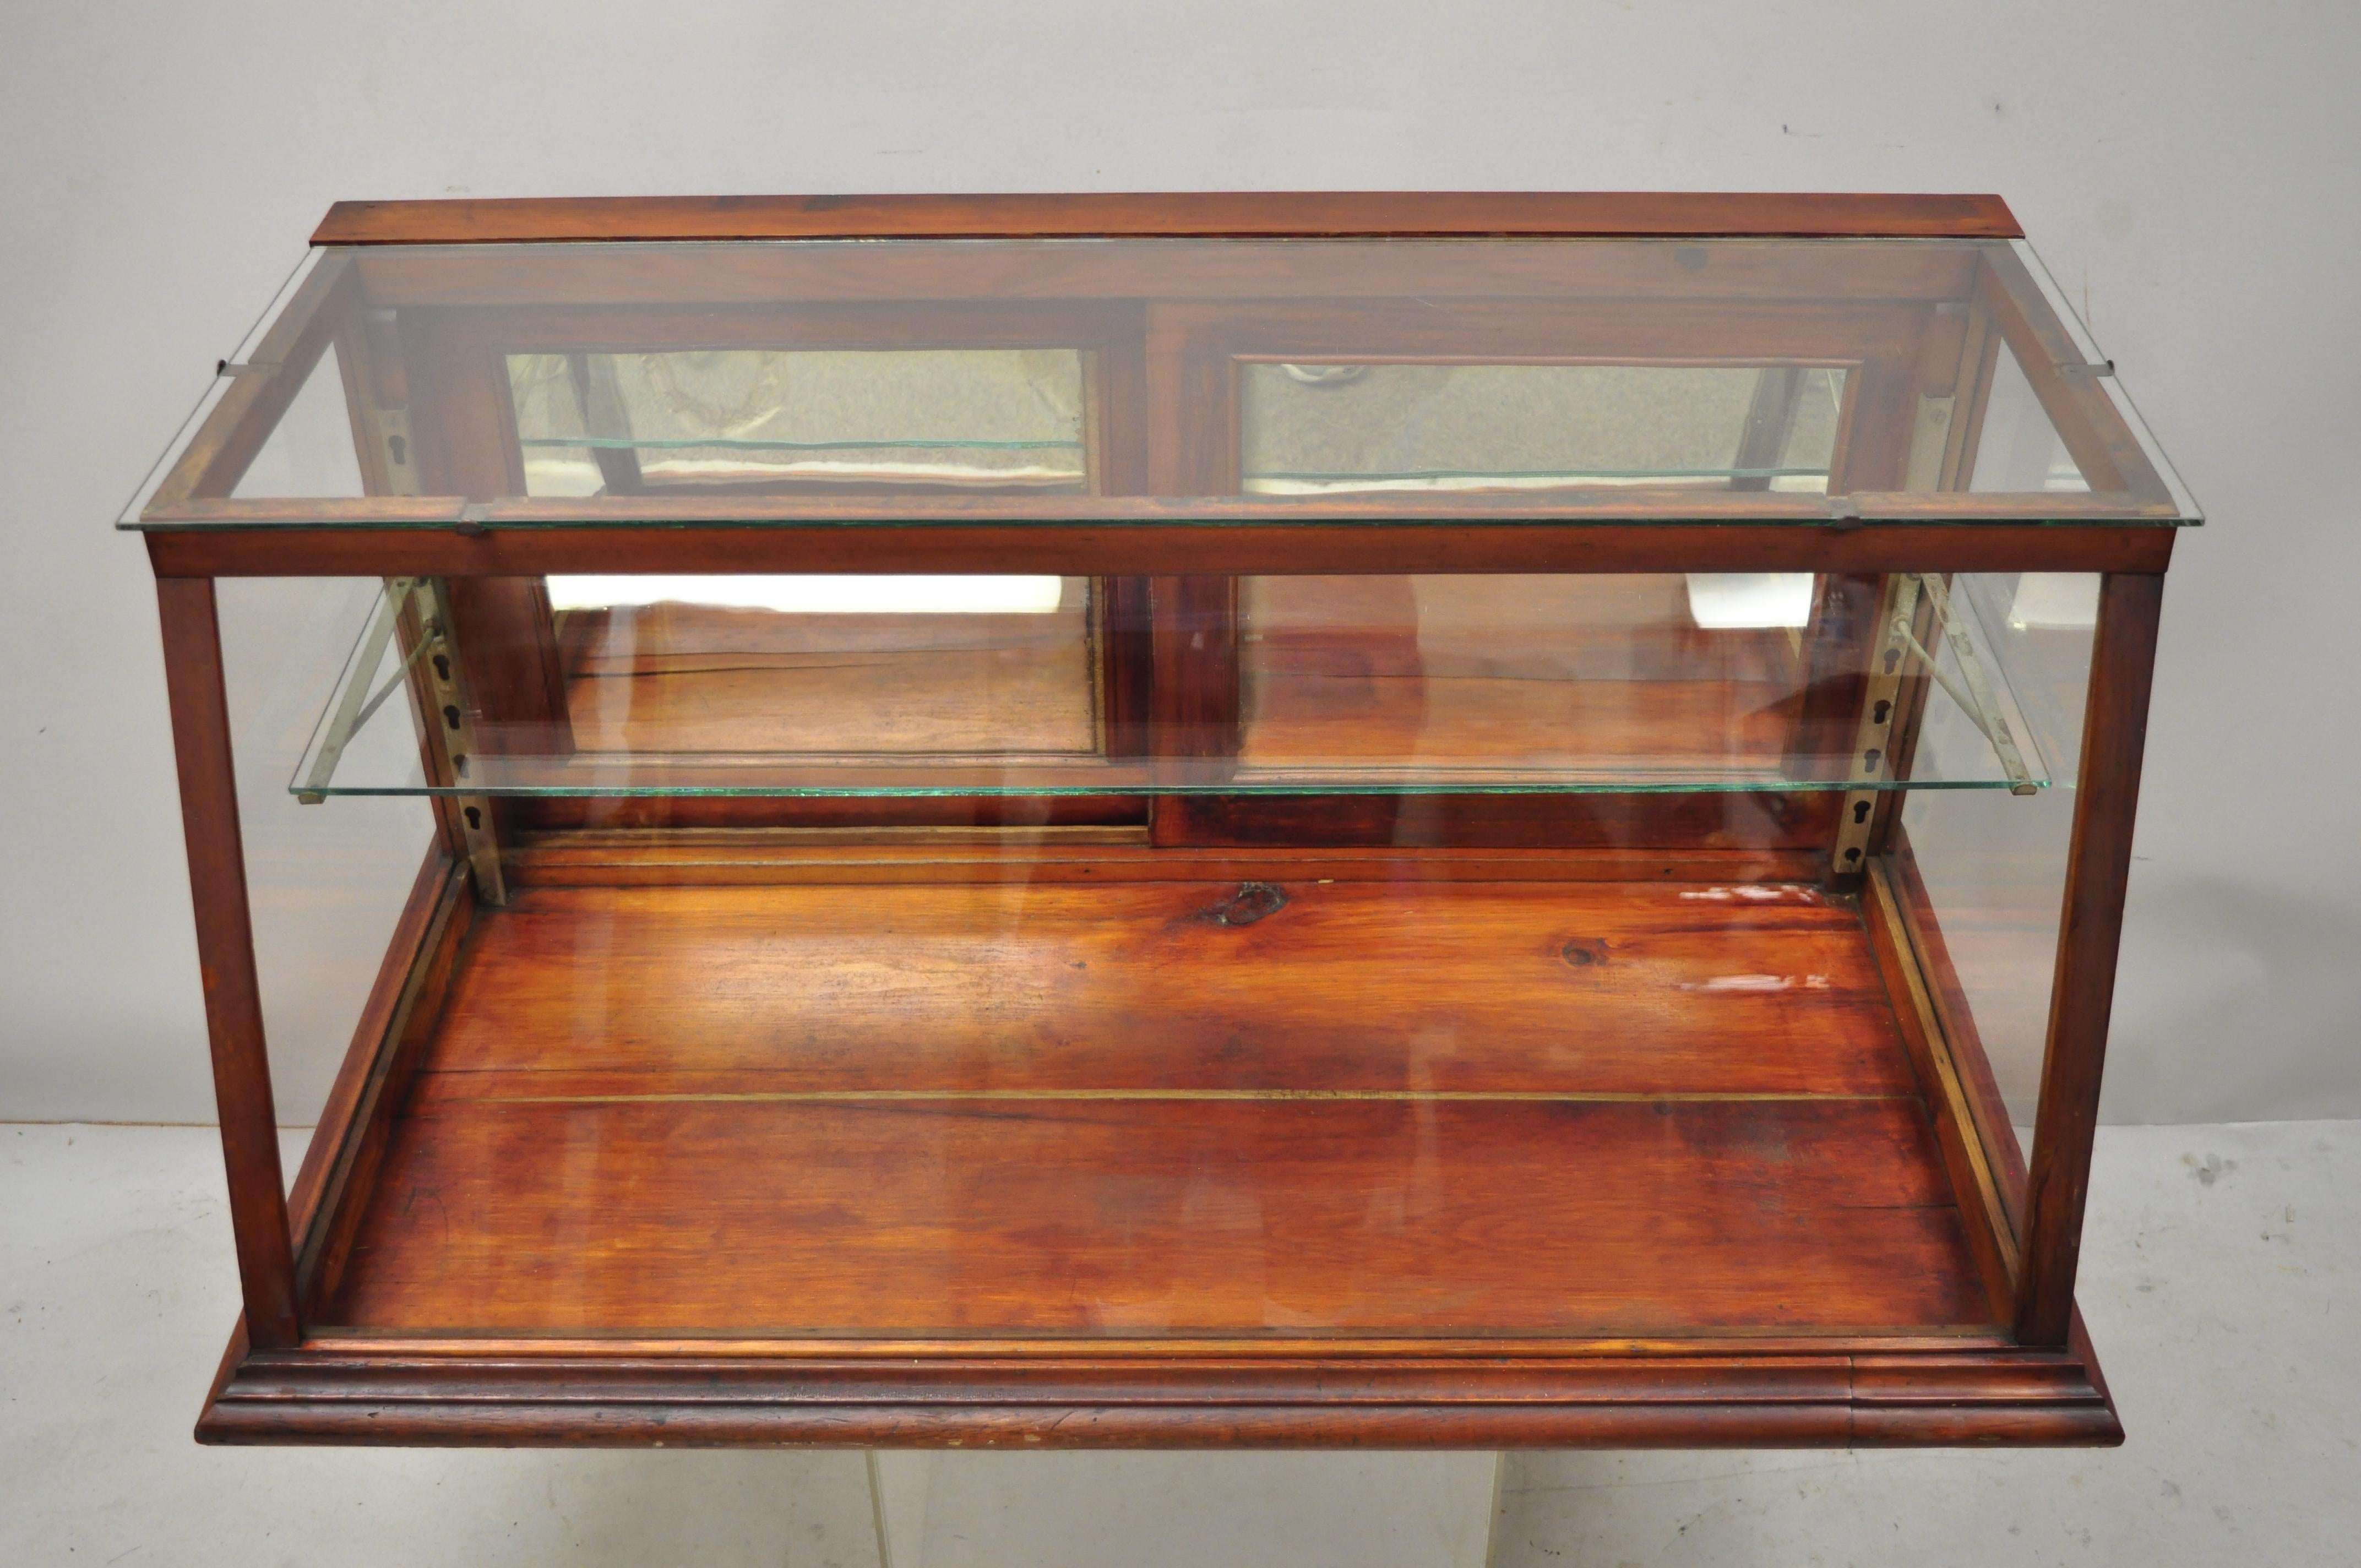 Antique Wood & Glass Angled Showcase Country Drug Store Counter Top Display Case 3